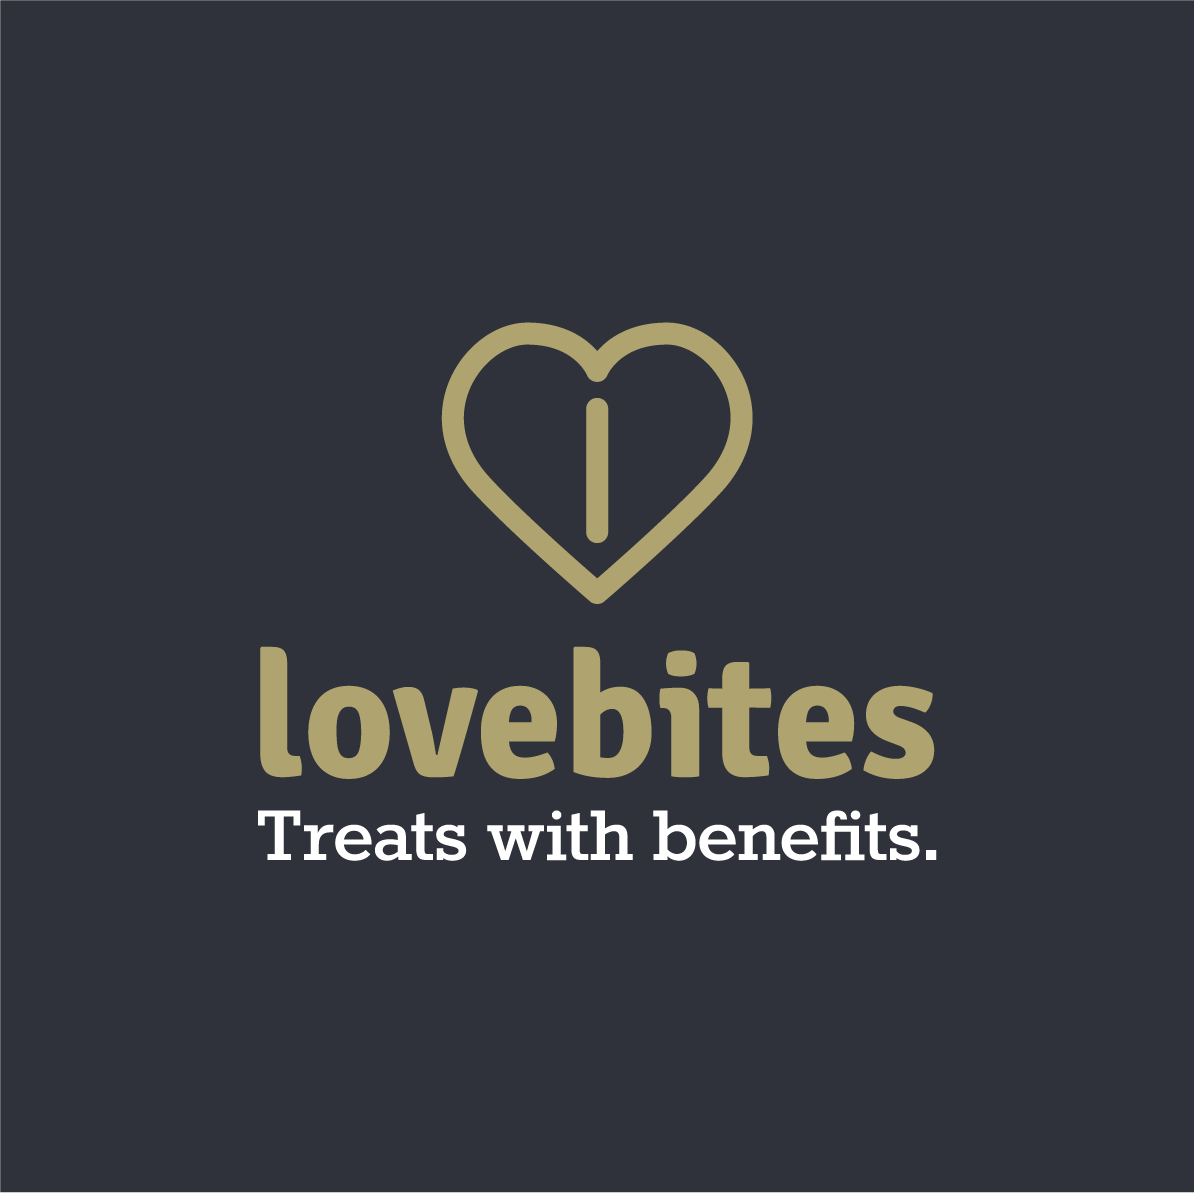 What makes Lovebites for Pets different?